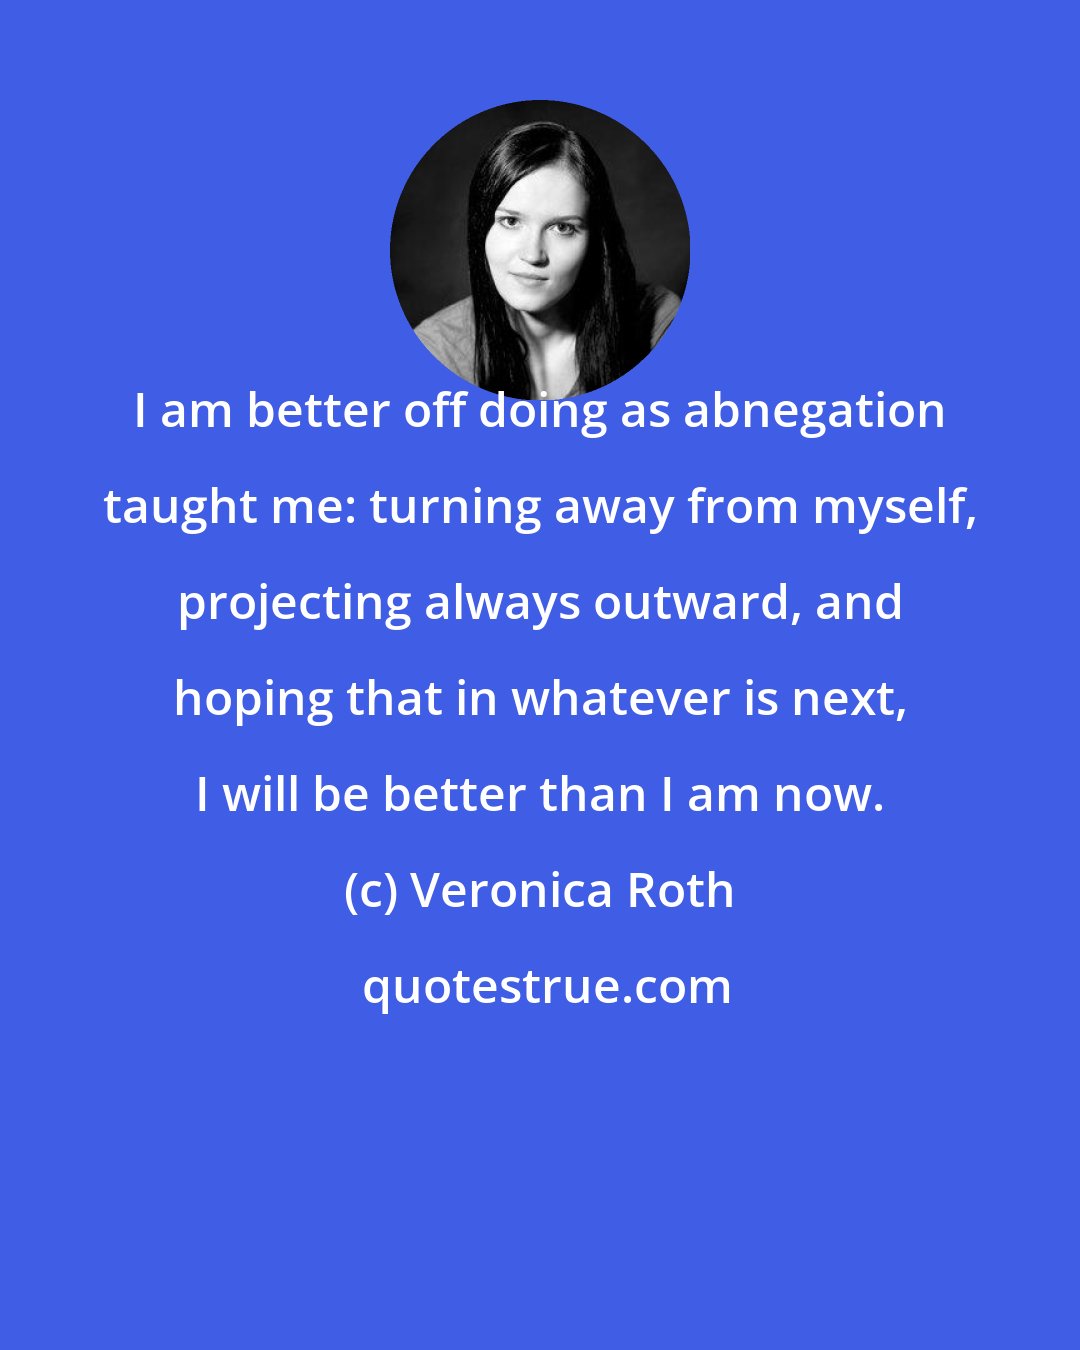 Veronica Roth: I am better off doing as abnegation taught me: turning away from myself, projecting always outward, and hoping that in whatever is next, I will be better than I am now.